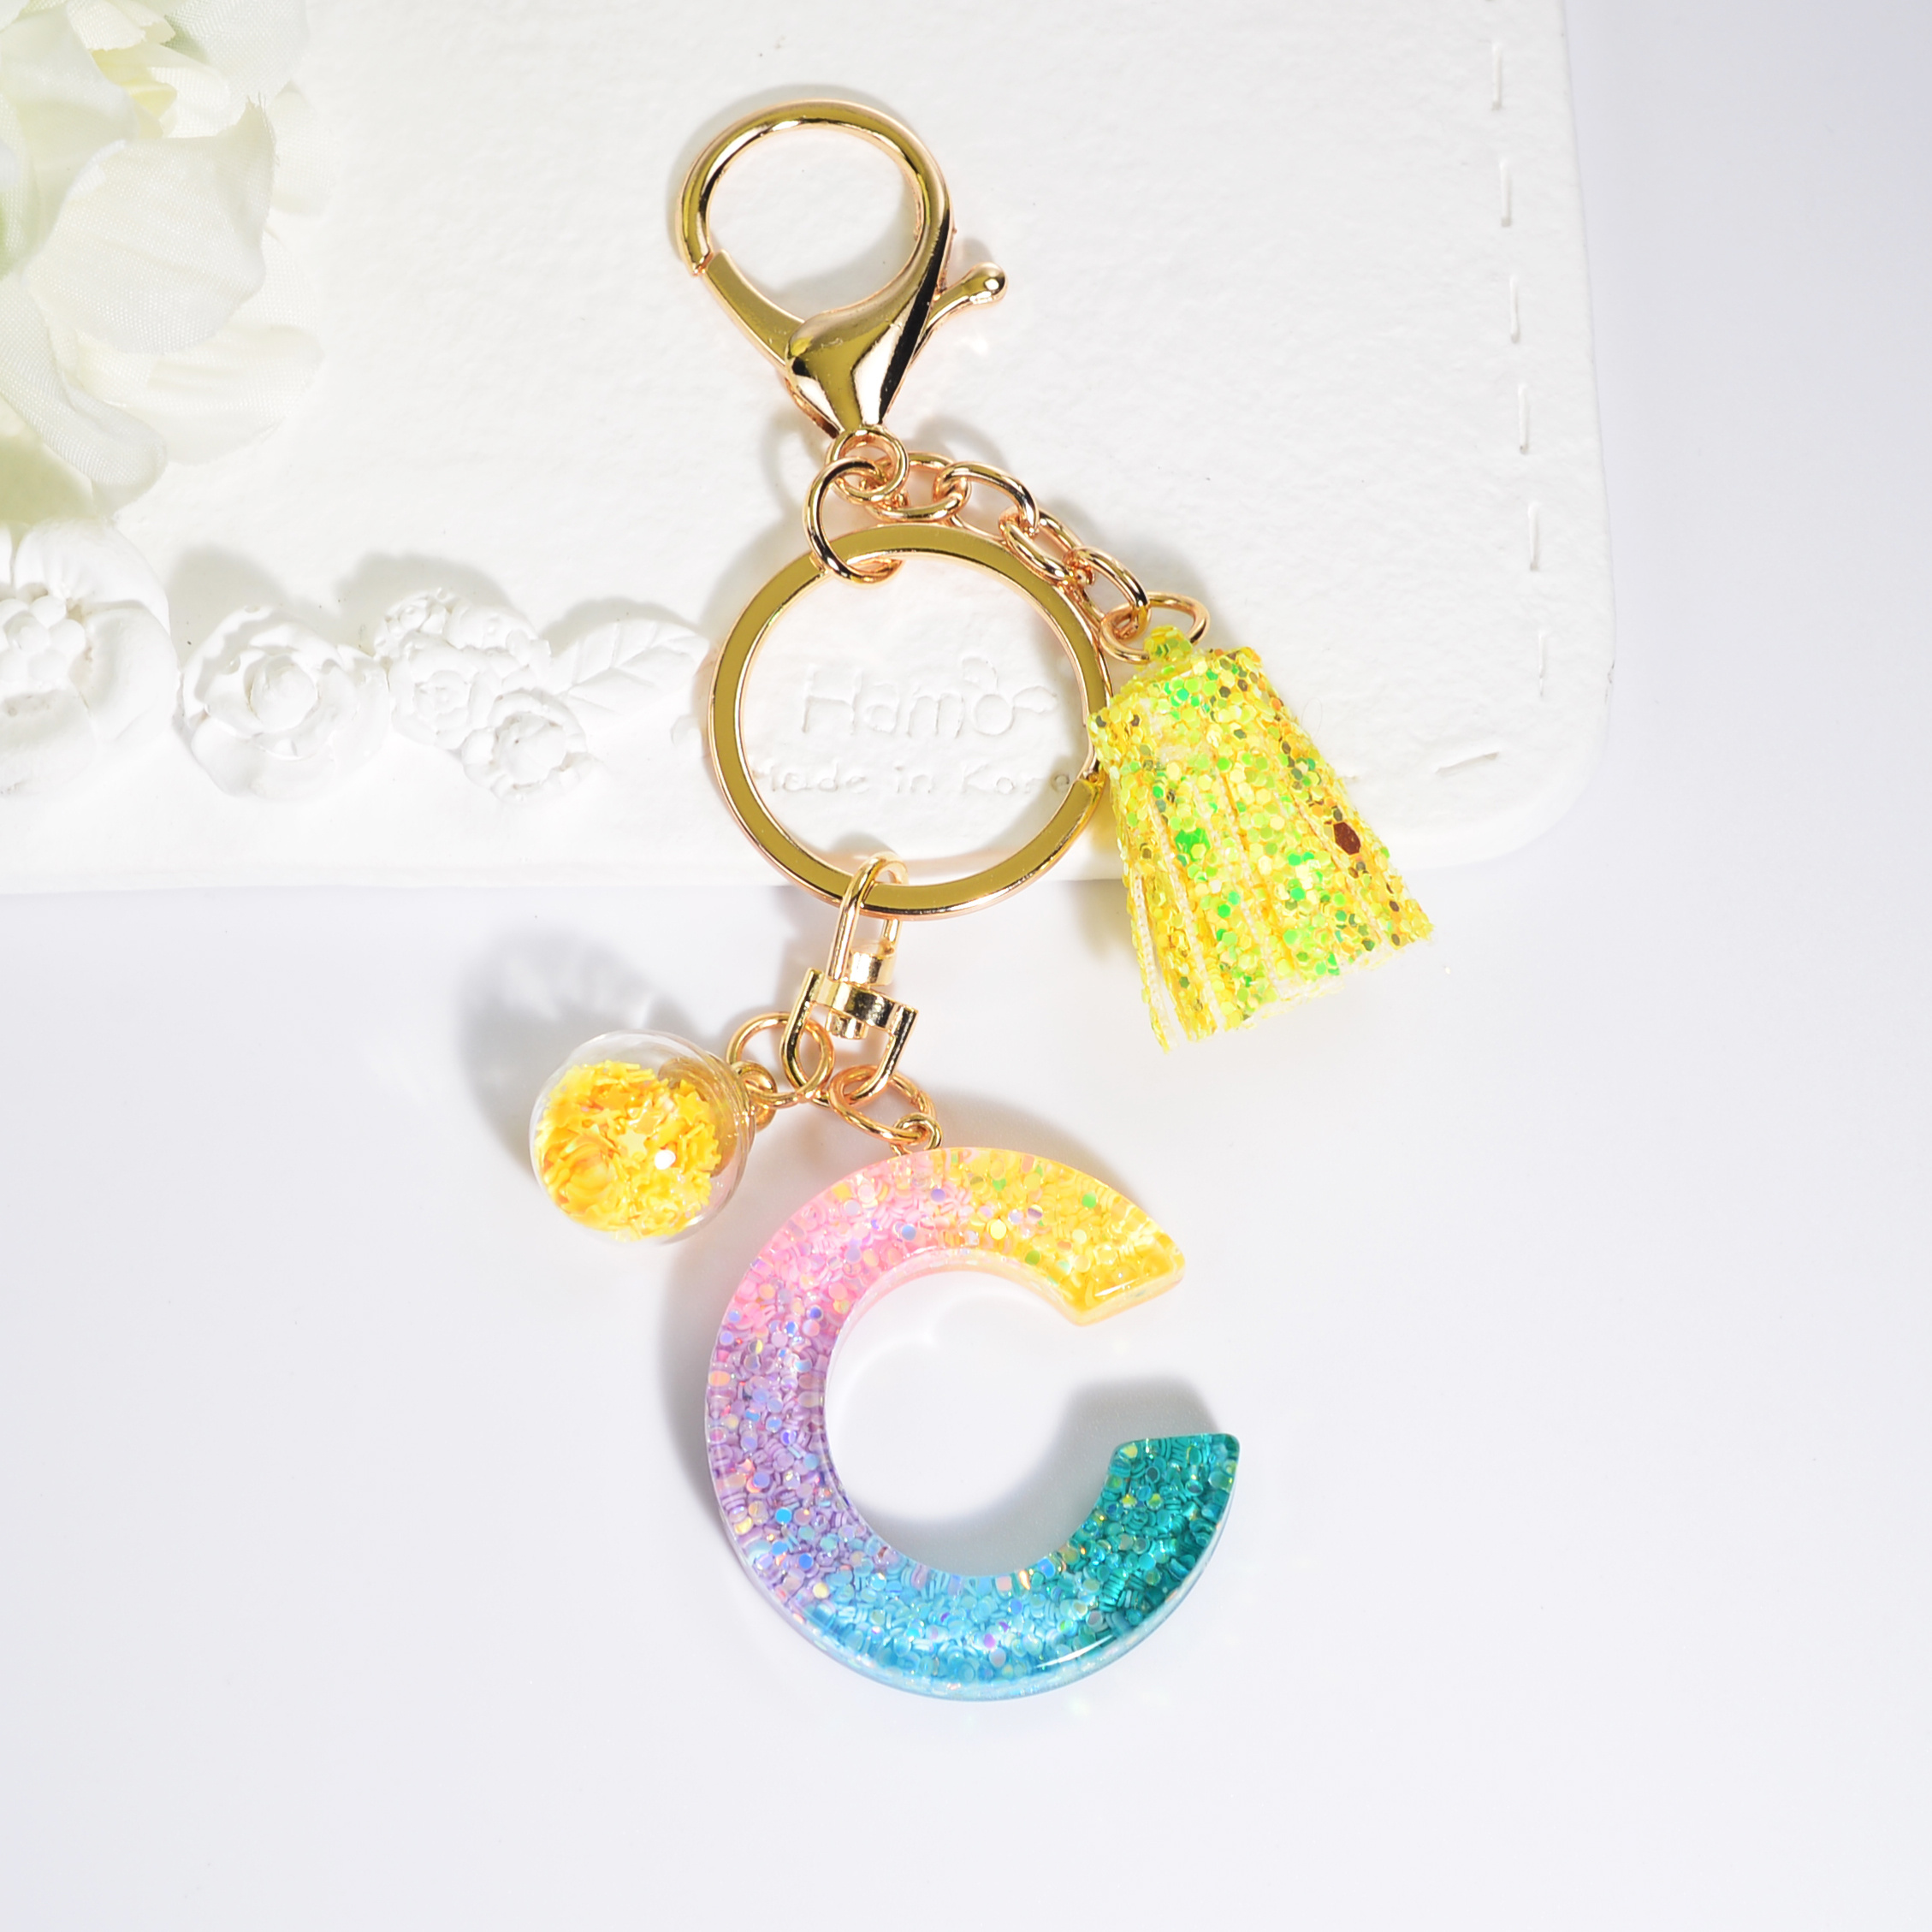 Fashion Colorful Letter Keychain Pendant Sequin Resin Key Chain